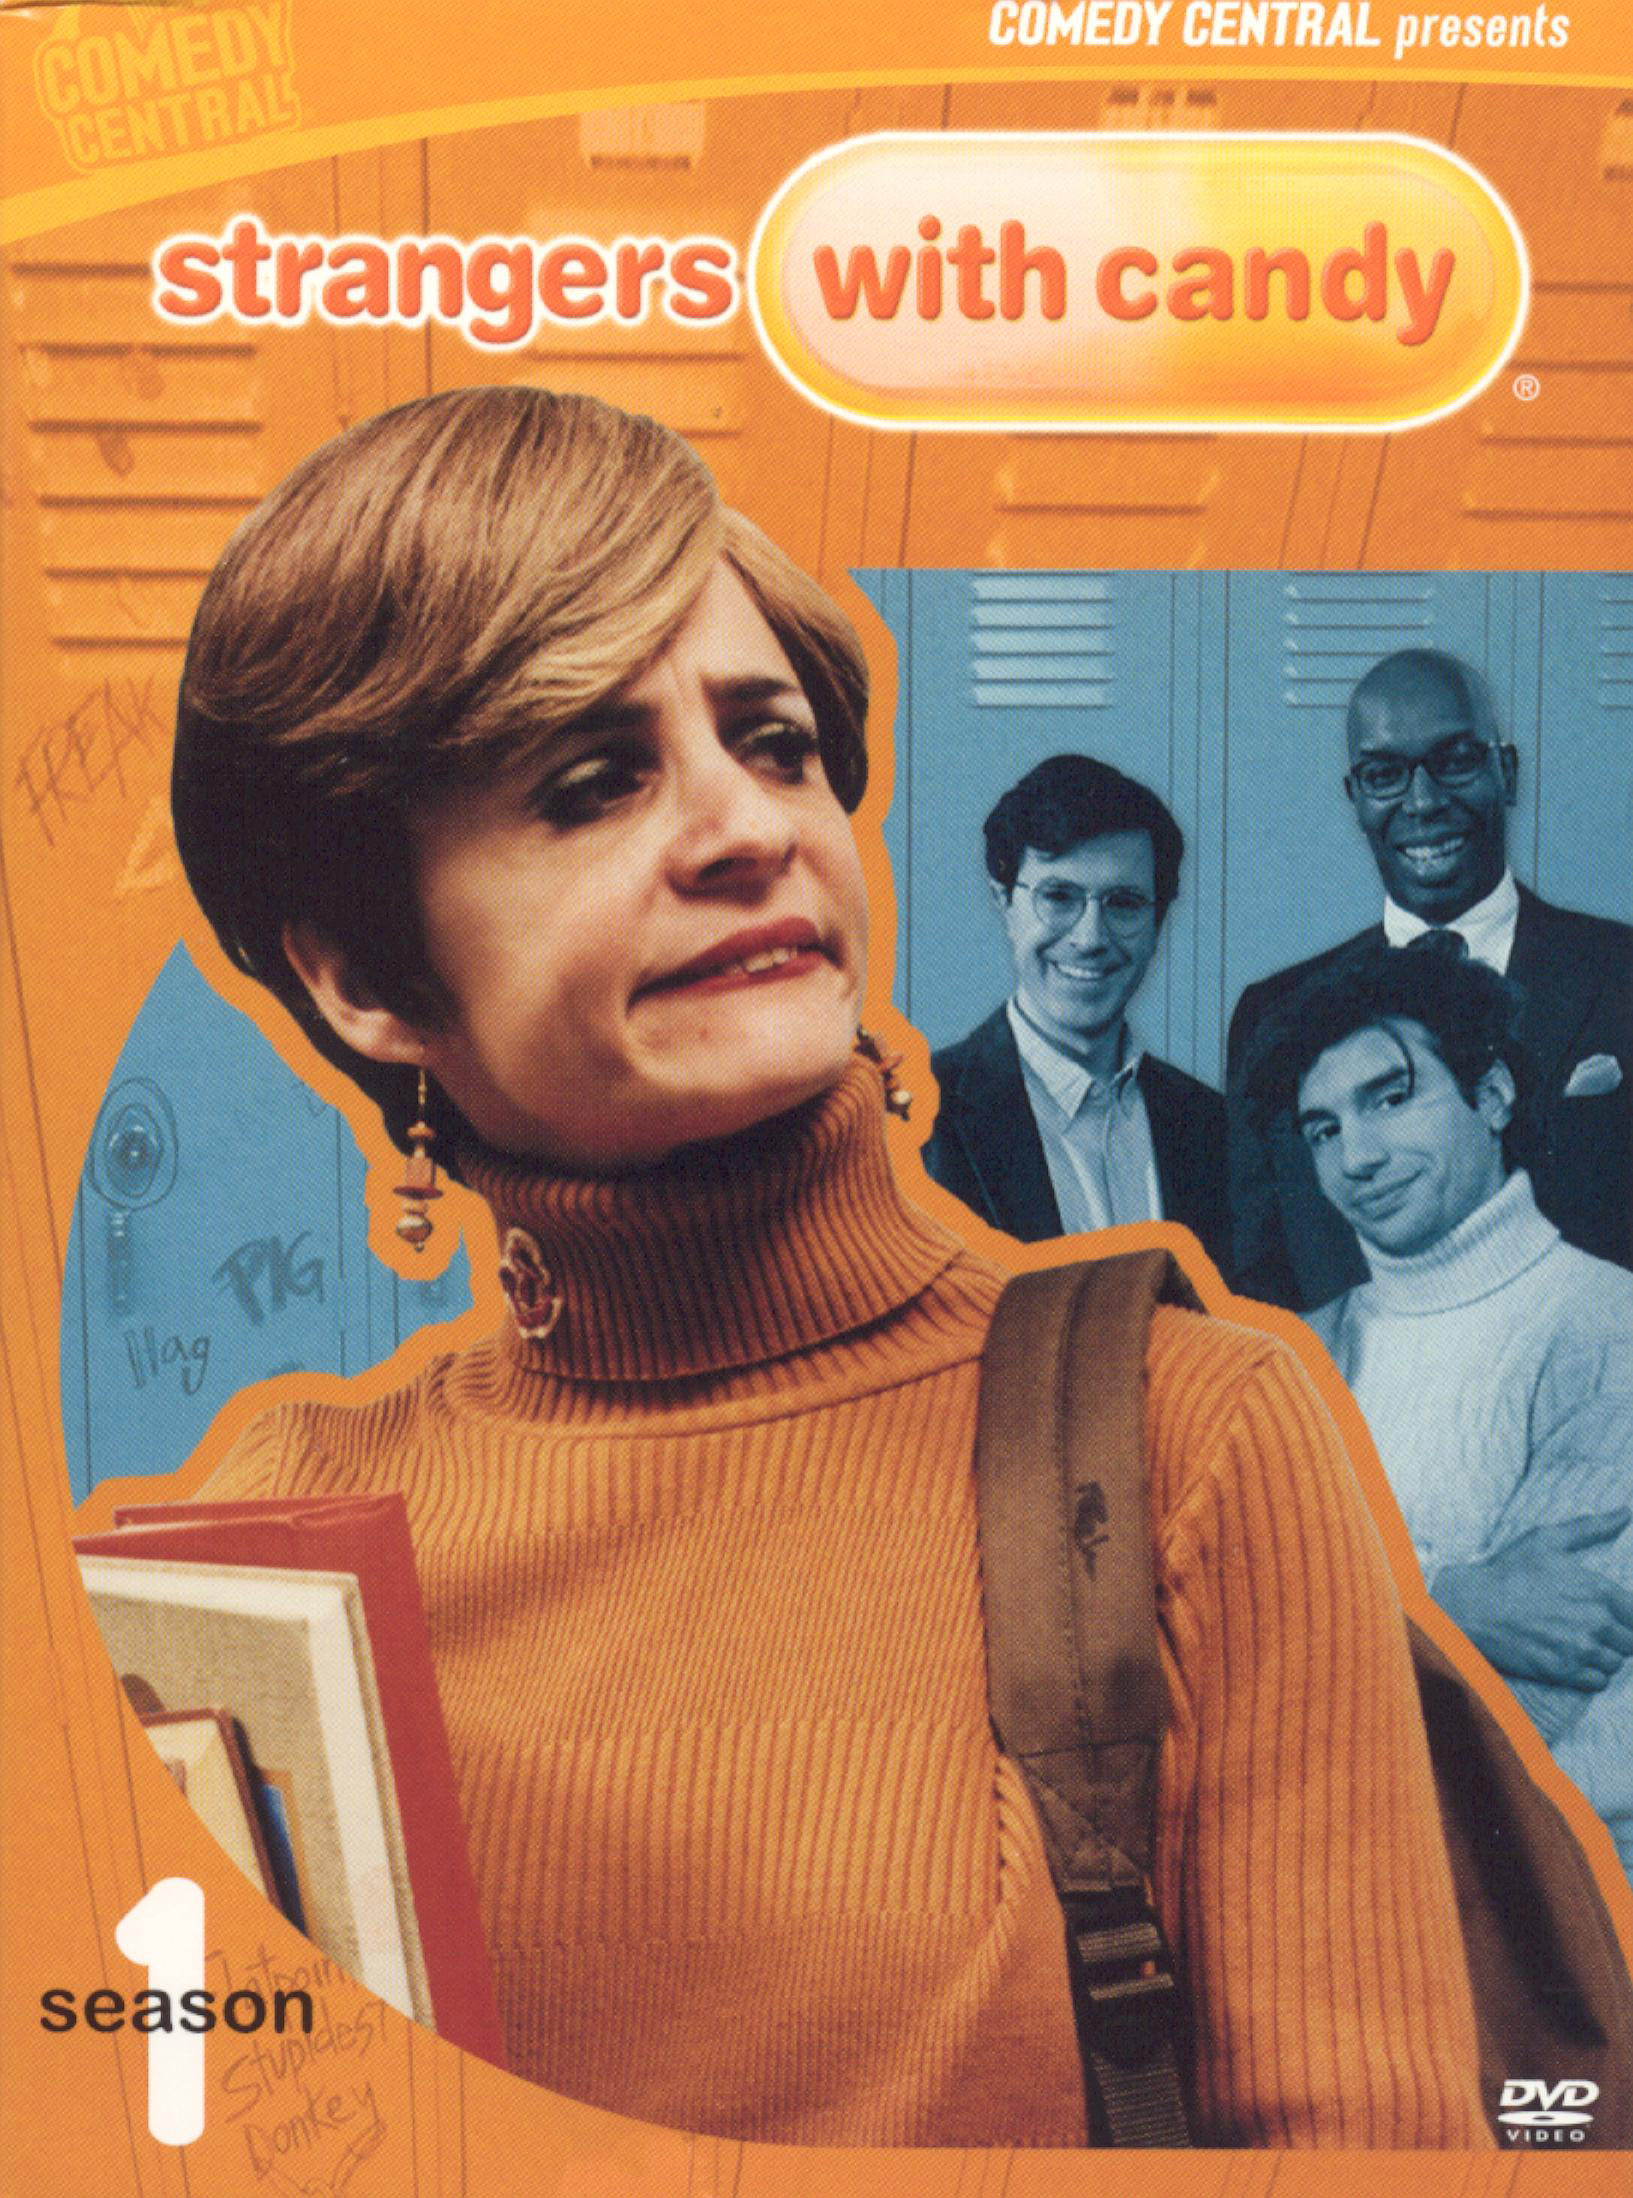 NEW-Strangers With Candy - Season 2 DVD Boxed Set 824363002293